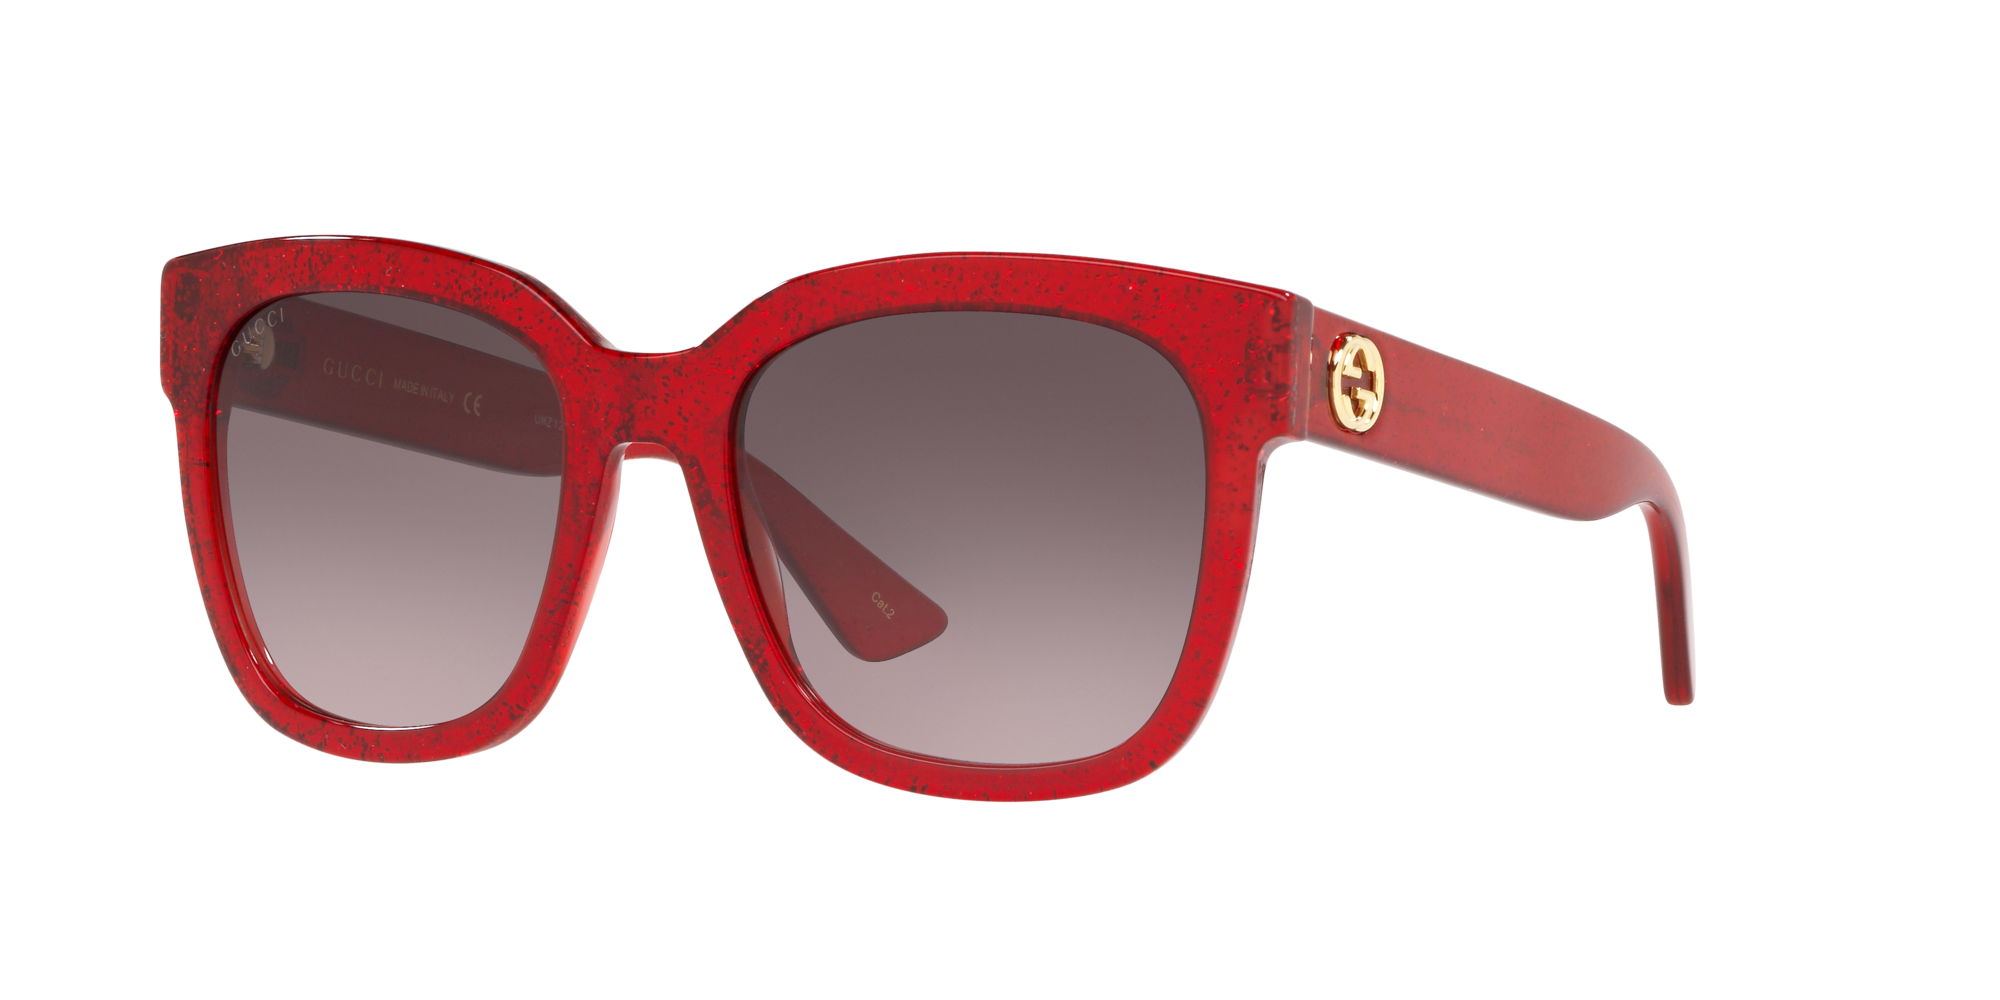 GG0034S 54: Shop Gucci Red/Burgundy Rectangle Sunglasses at LensCrafters